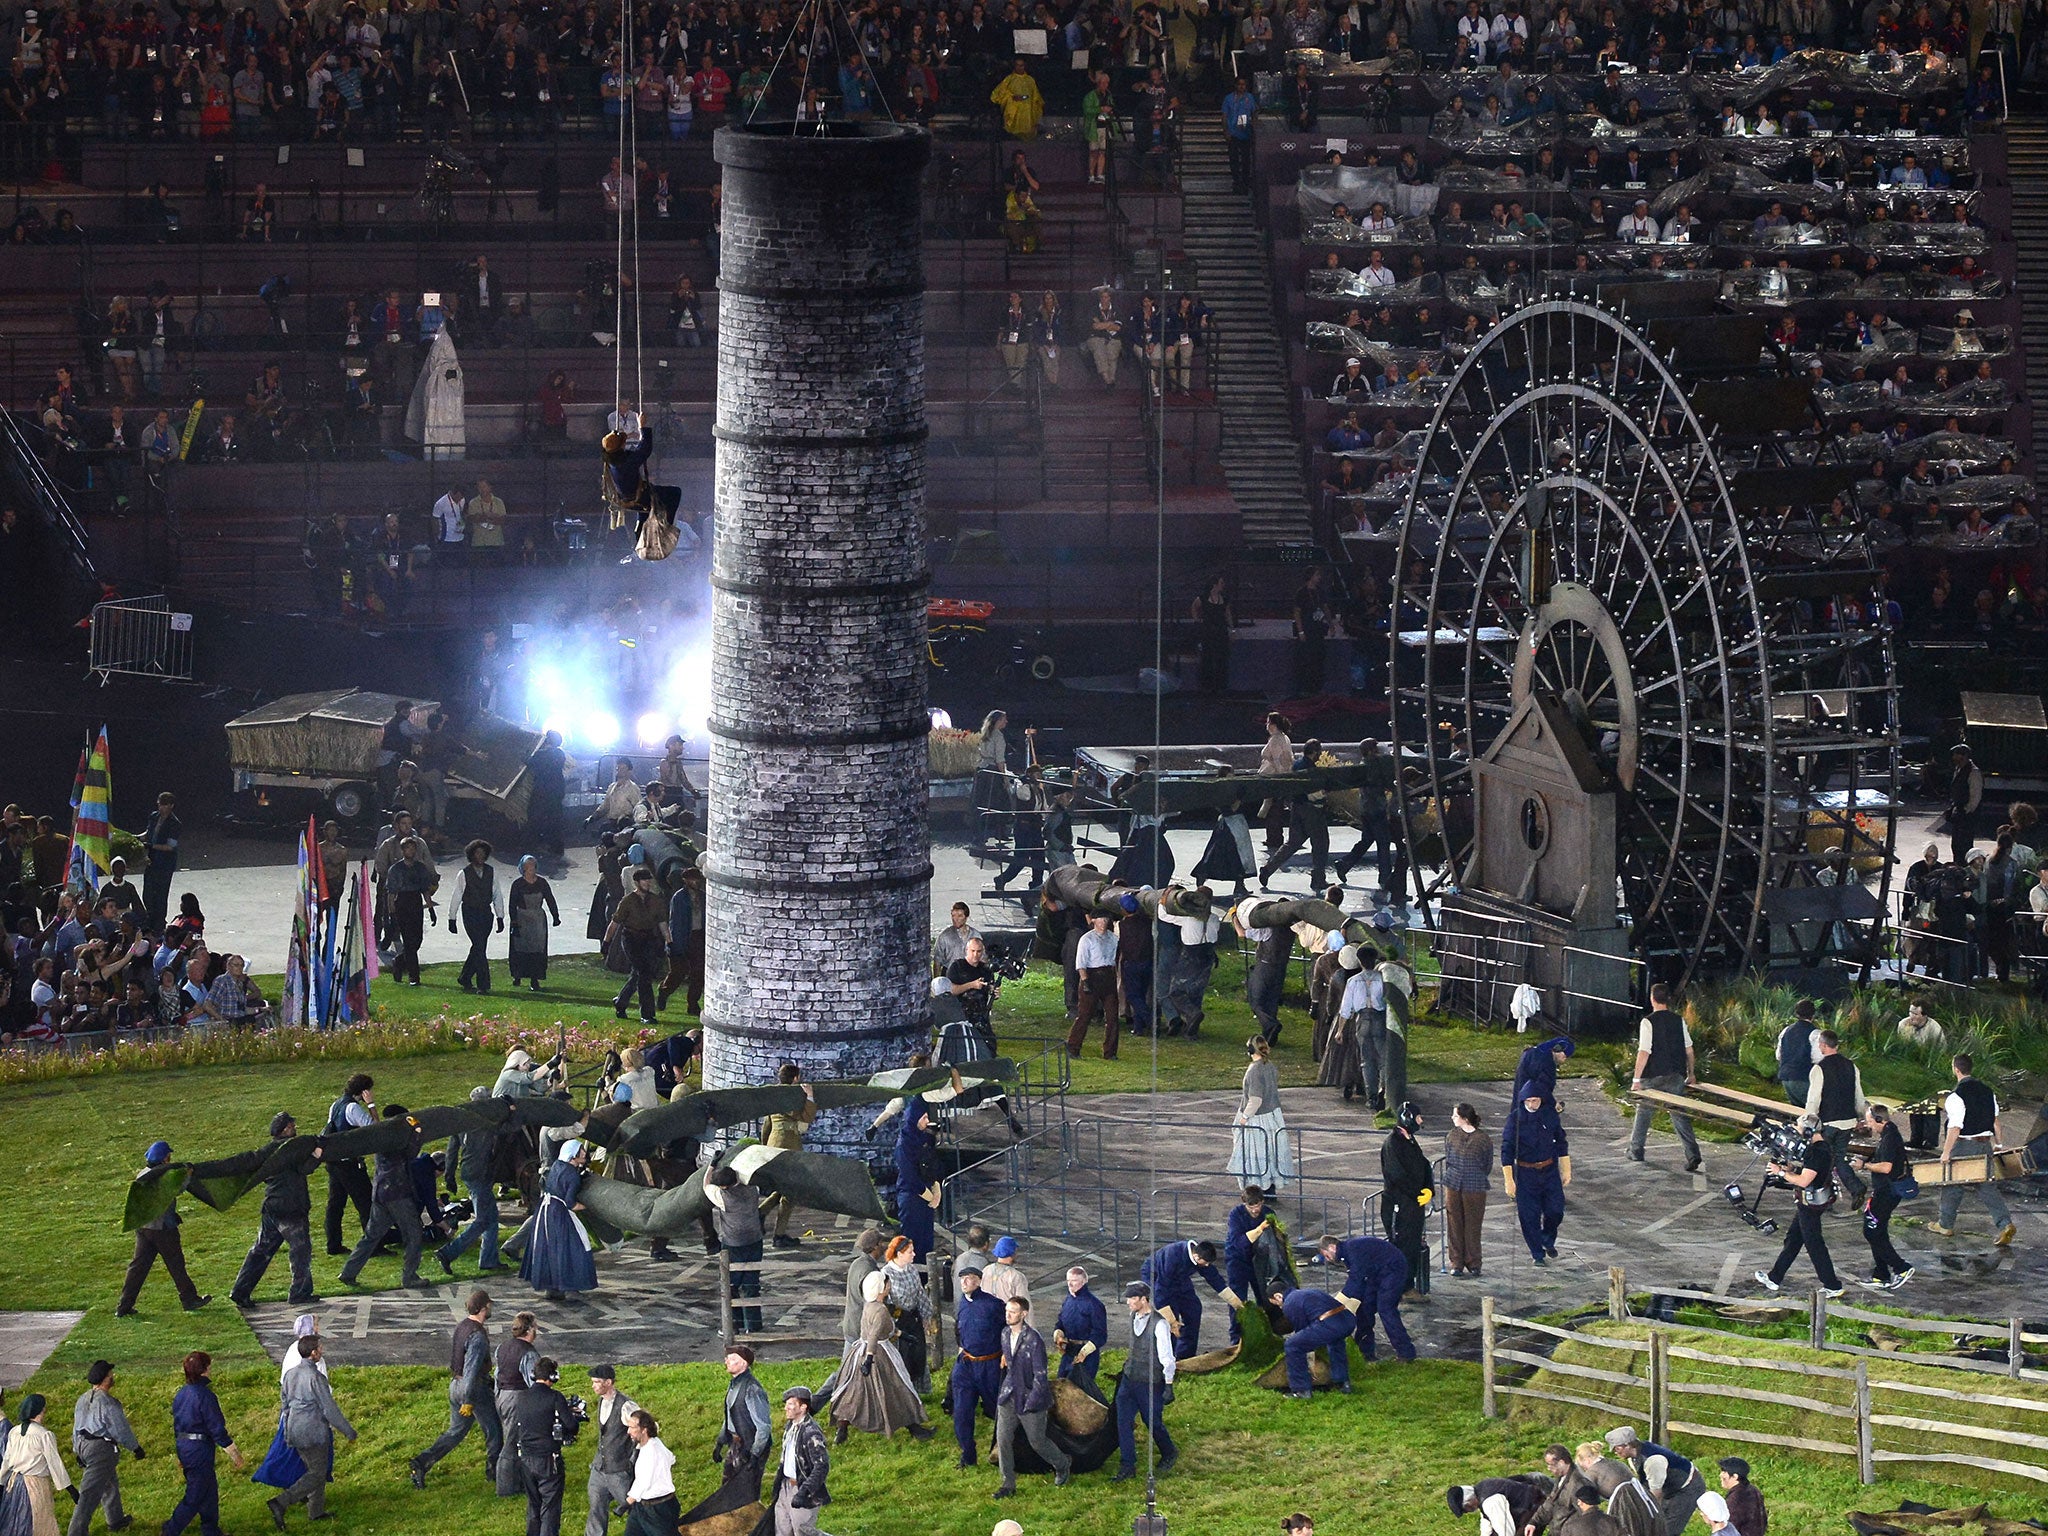 Performers showcasing the Industrial Revolution during the Opening Ceremony of the London 2012 Olympic Games